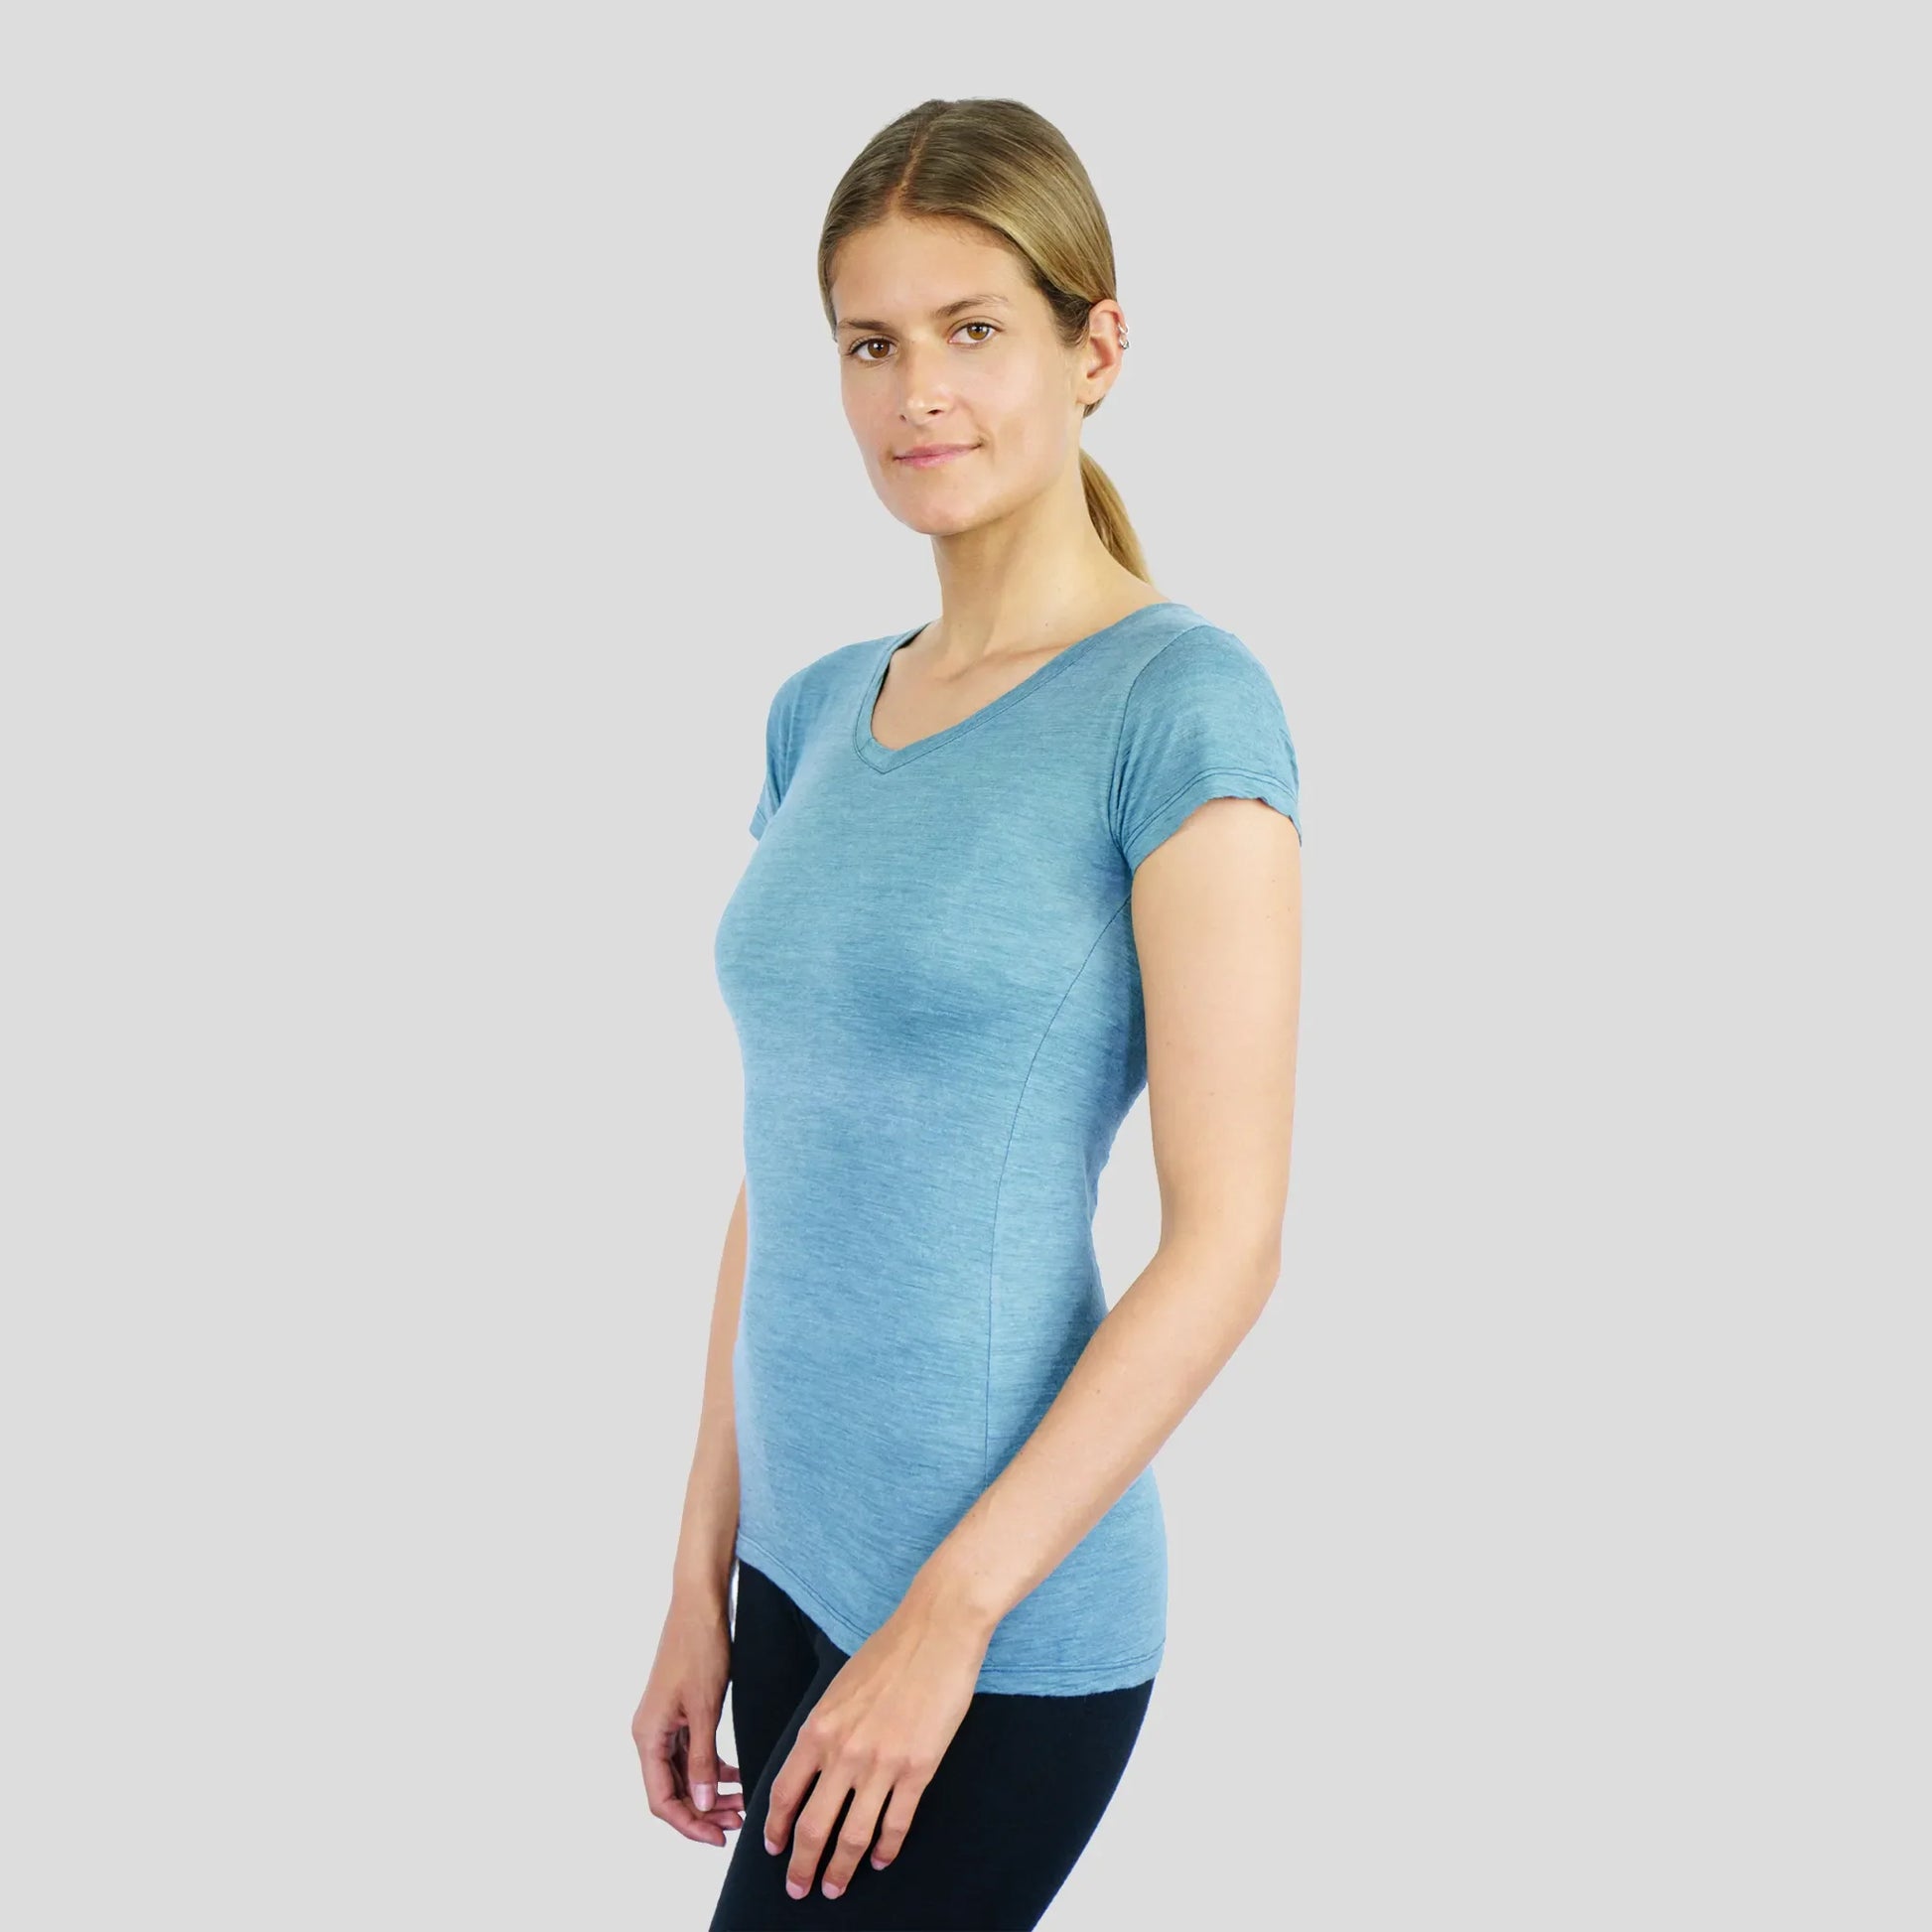 Women's Alpaca Wool T-Shirt: 160 Ultralight V-Neck color Natural Natural Turquoise